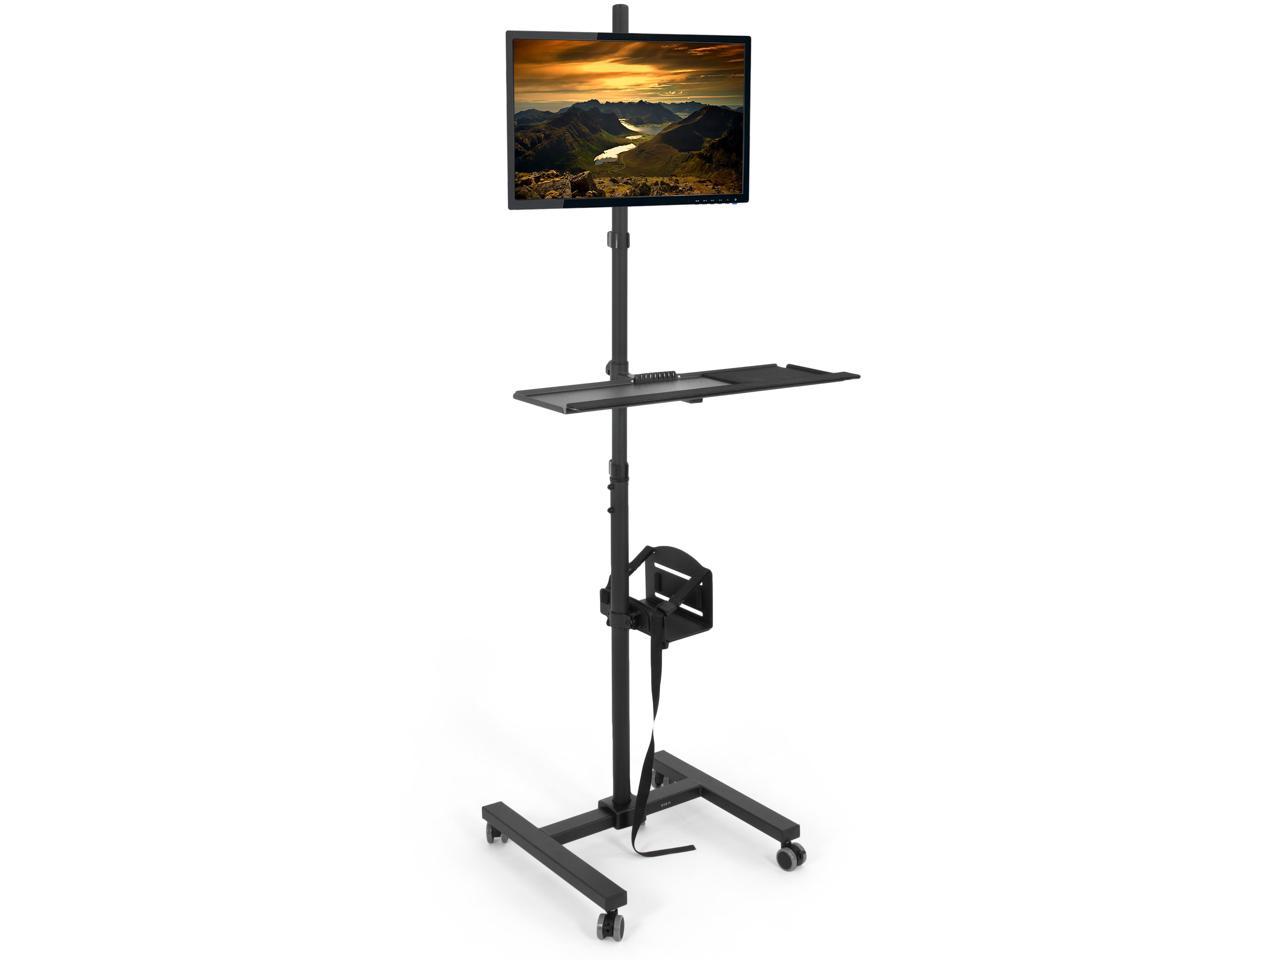 Adjustable PC Mobile Cart Office Compact Desktop Computer Monitor Stand w/ wheel 